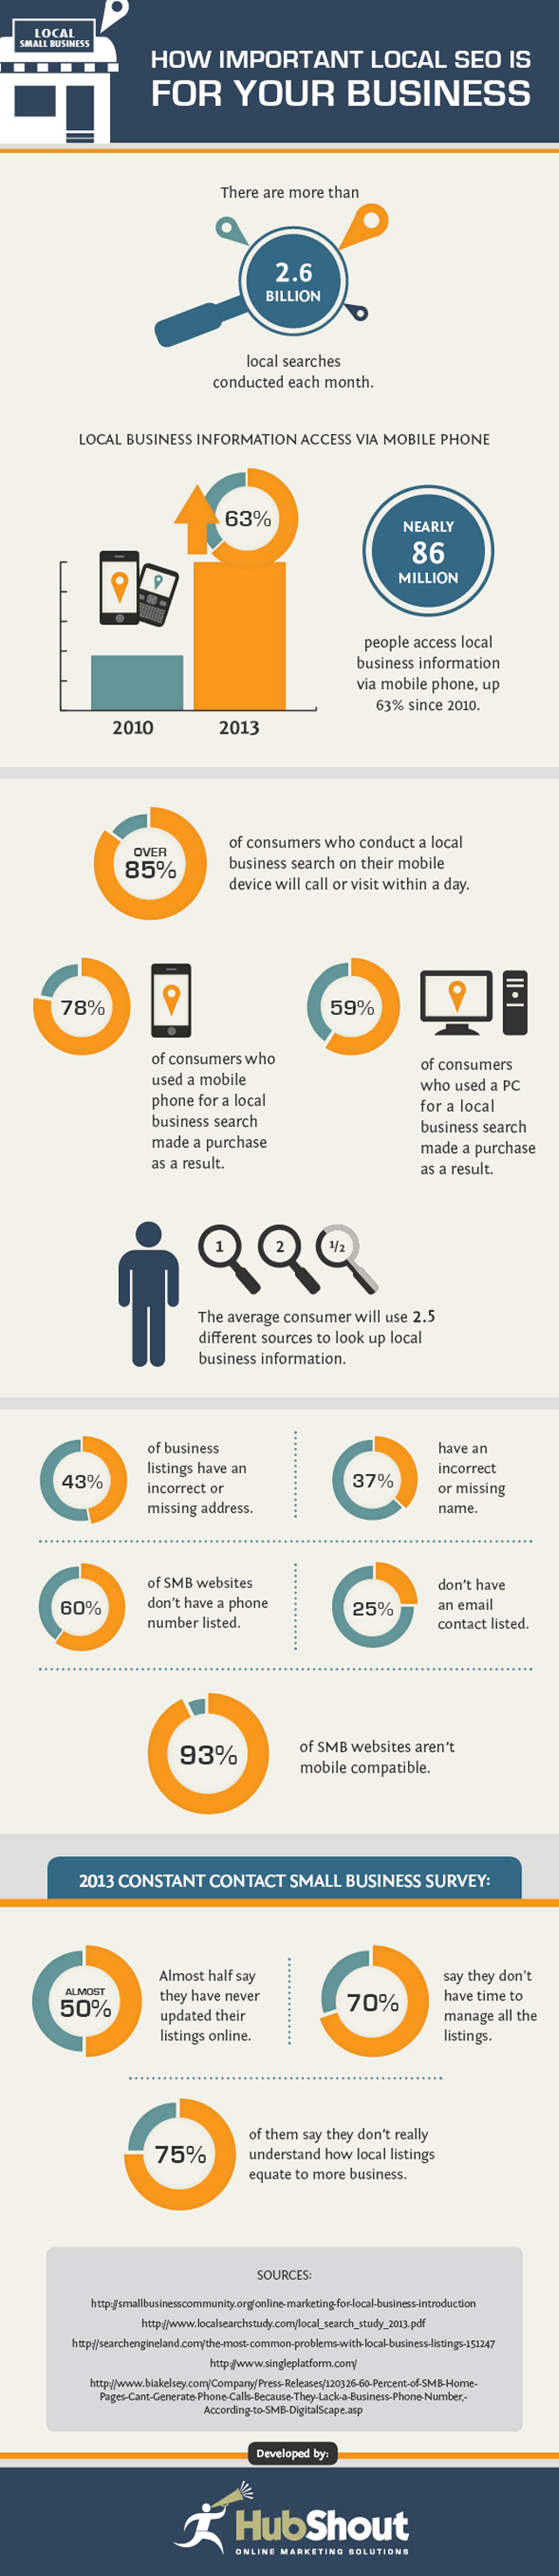 How_important_local_seo_is_for_your_business